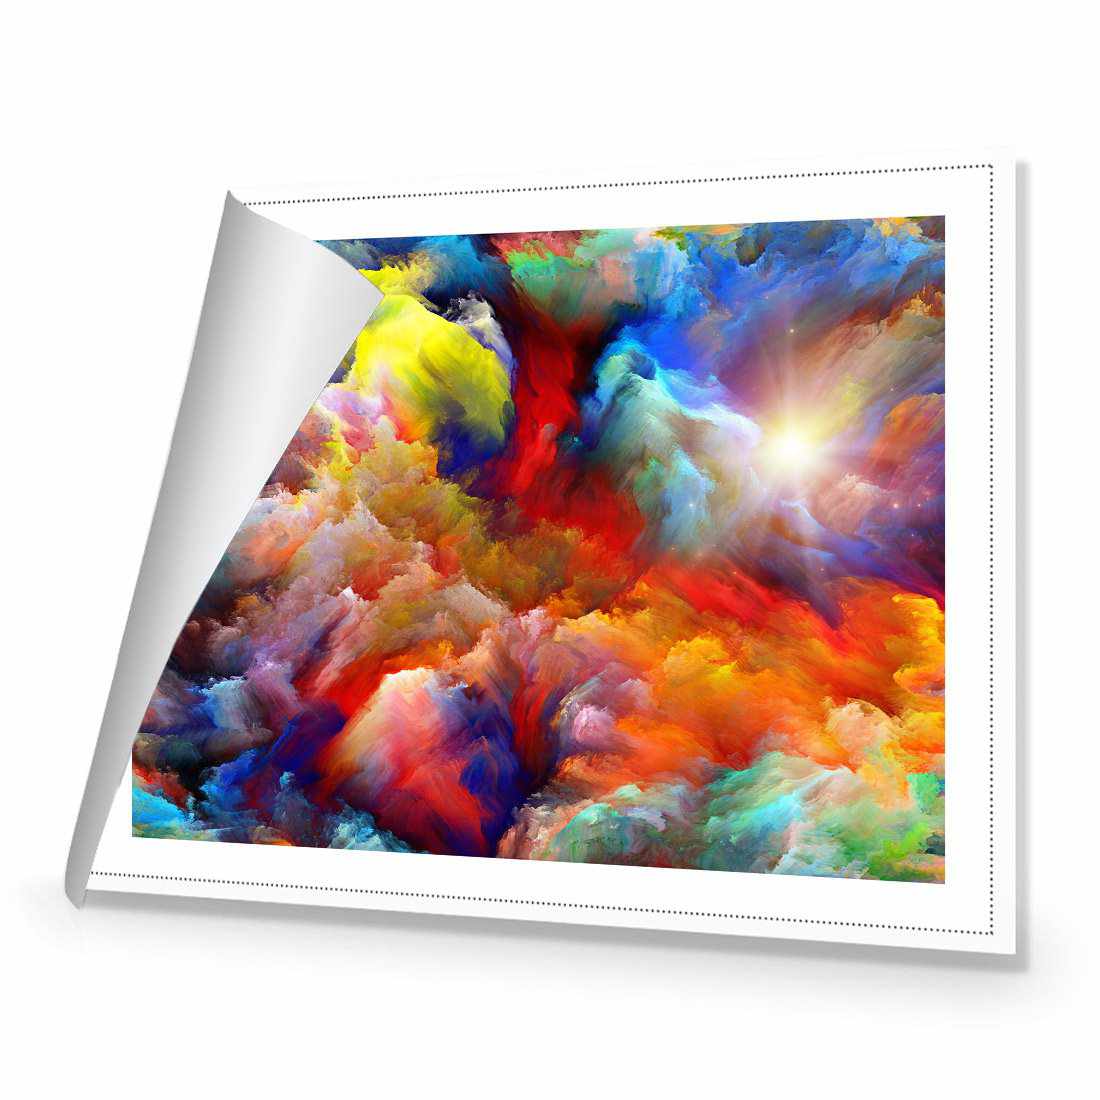 Clouds Of Colour Canvas Art-Canvas-Wall Art Designs-45x30cm-Rolled Canvas-Wall Art Designs